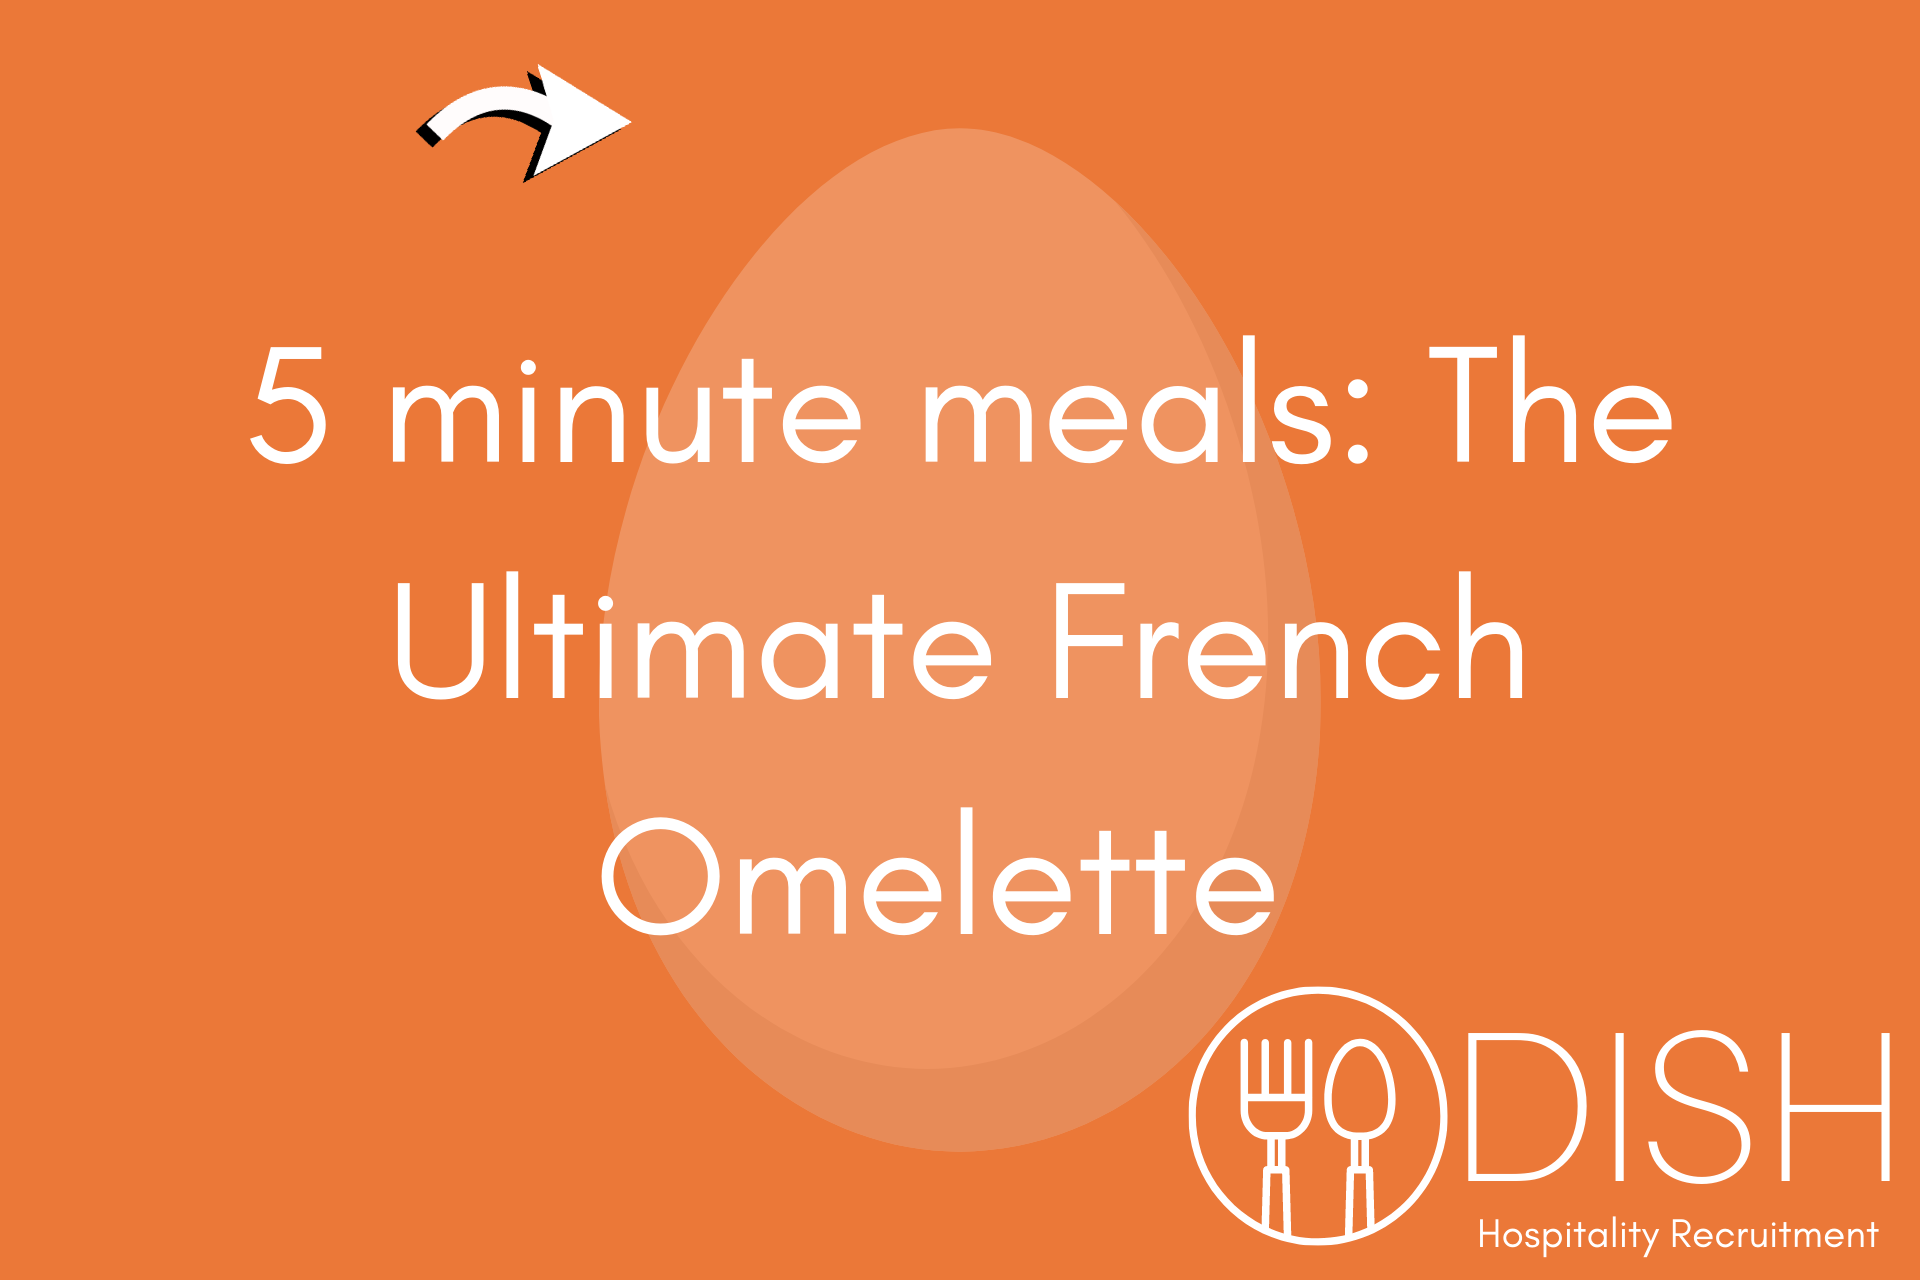 5 minute meals: The Ultimate French Omelette